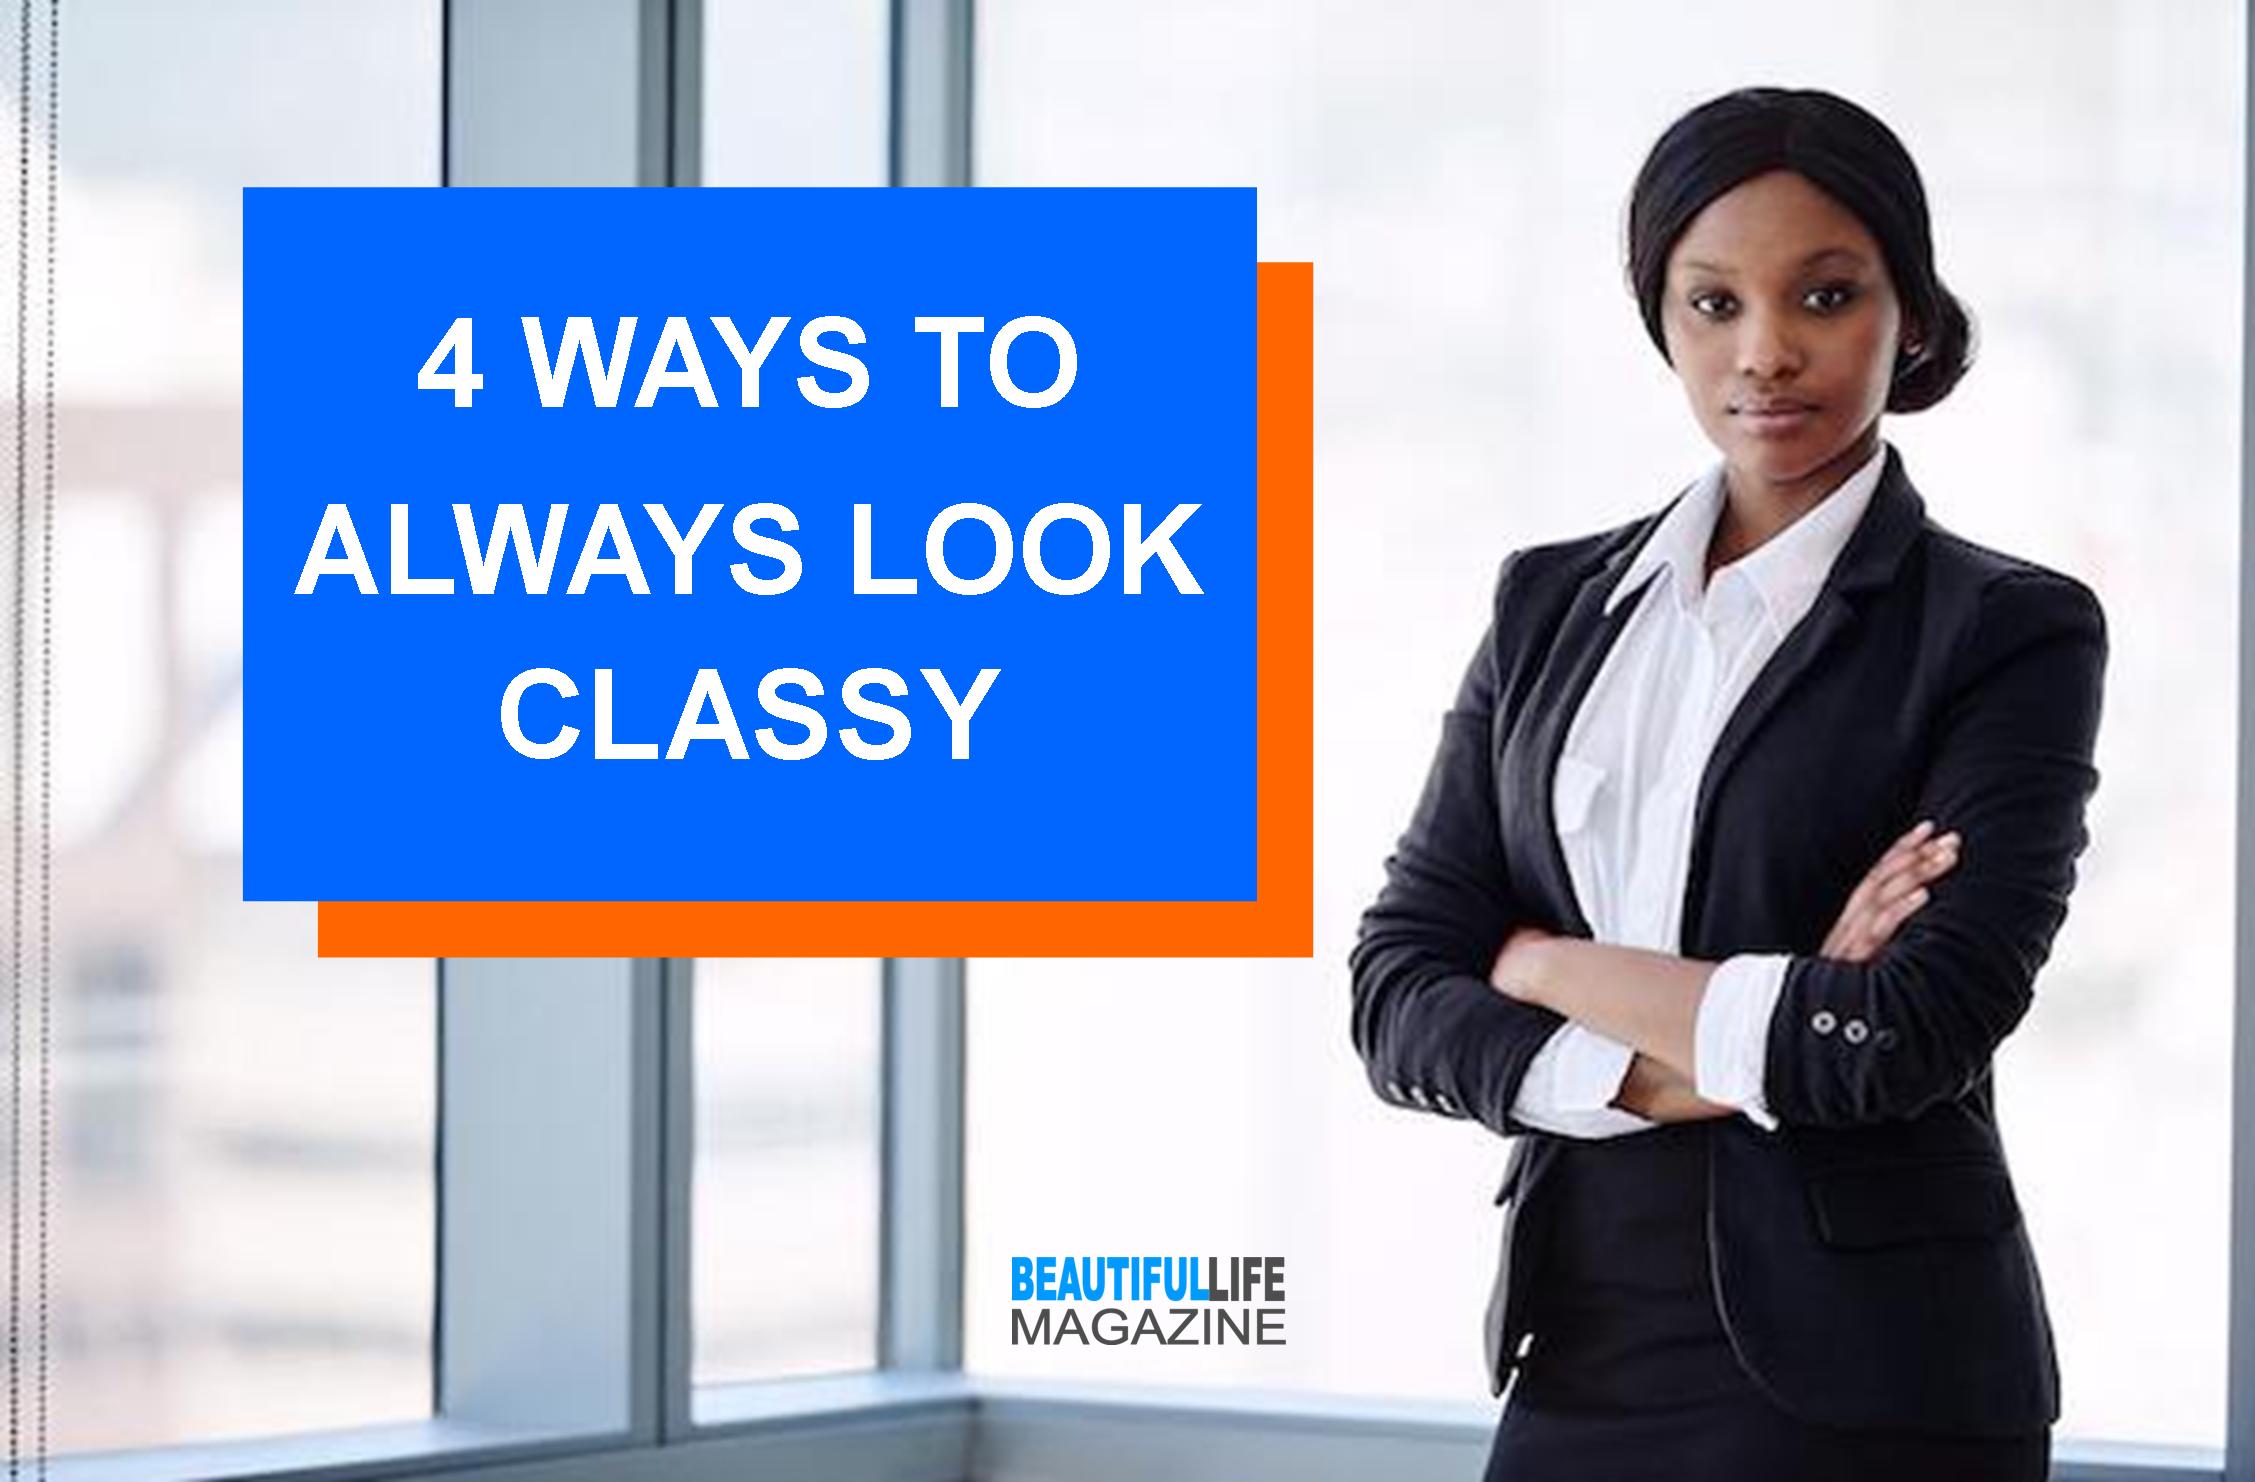 Today I’m sharing some of my tried and true tips to creating a classy outfit that will have you looking and feeling your best!